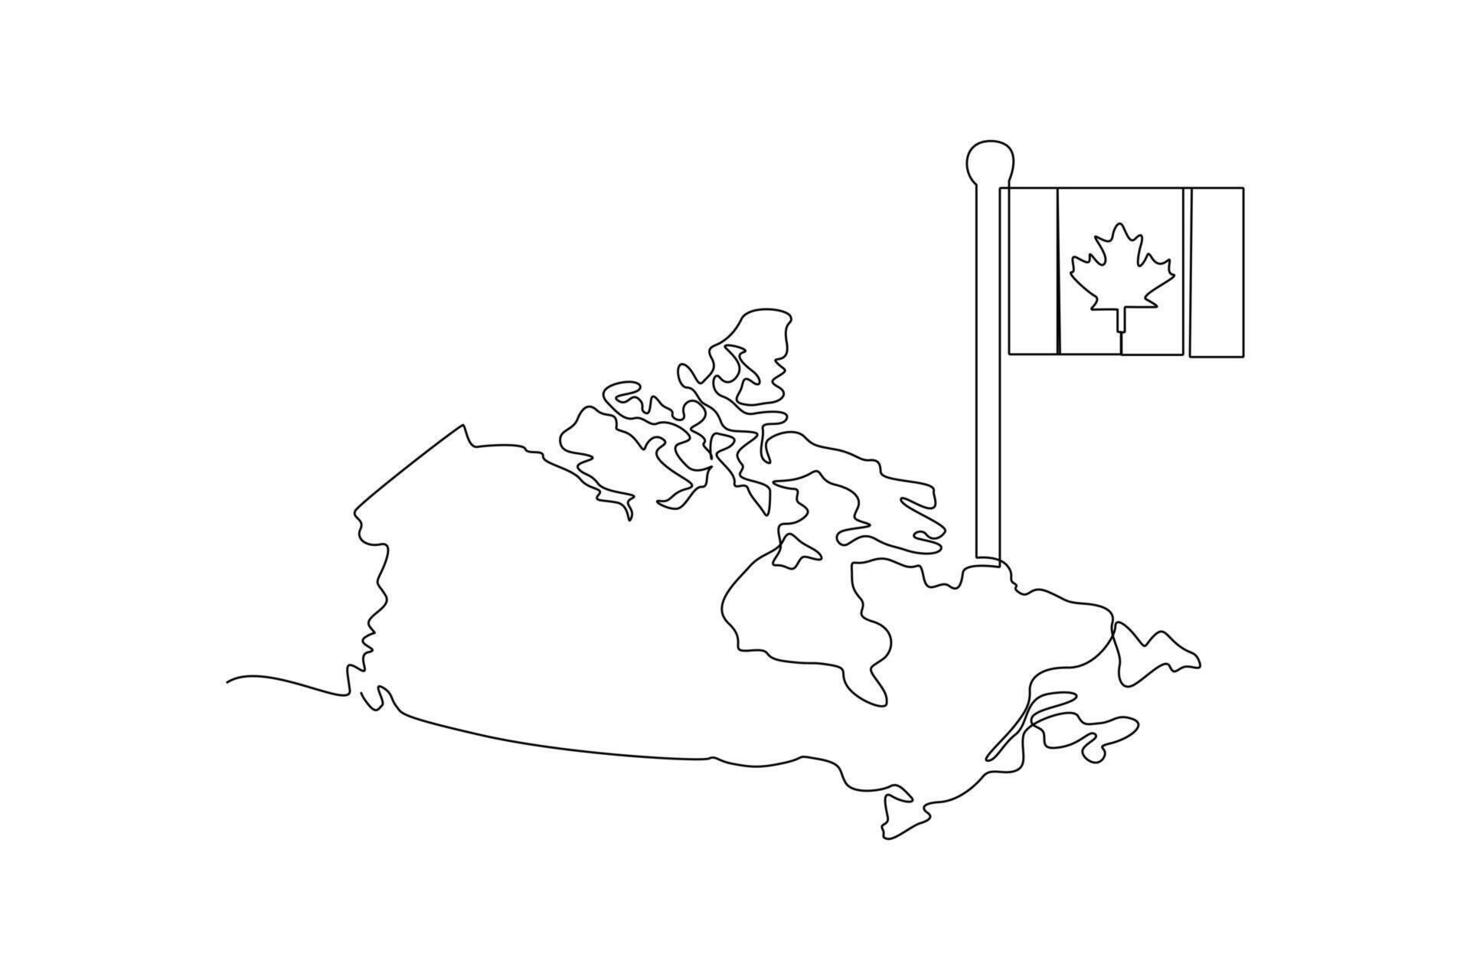 Continuous one line drawing World map concept. Doodle vector illustration.